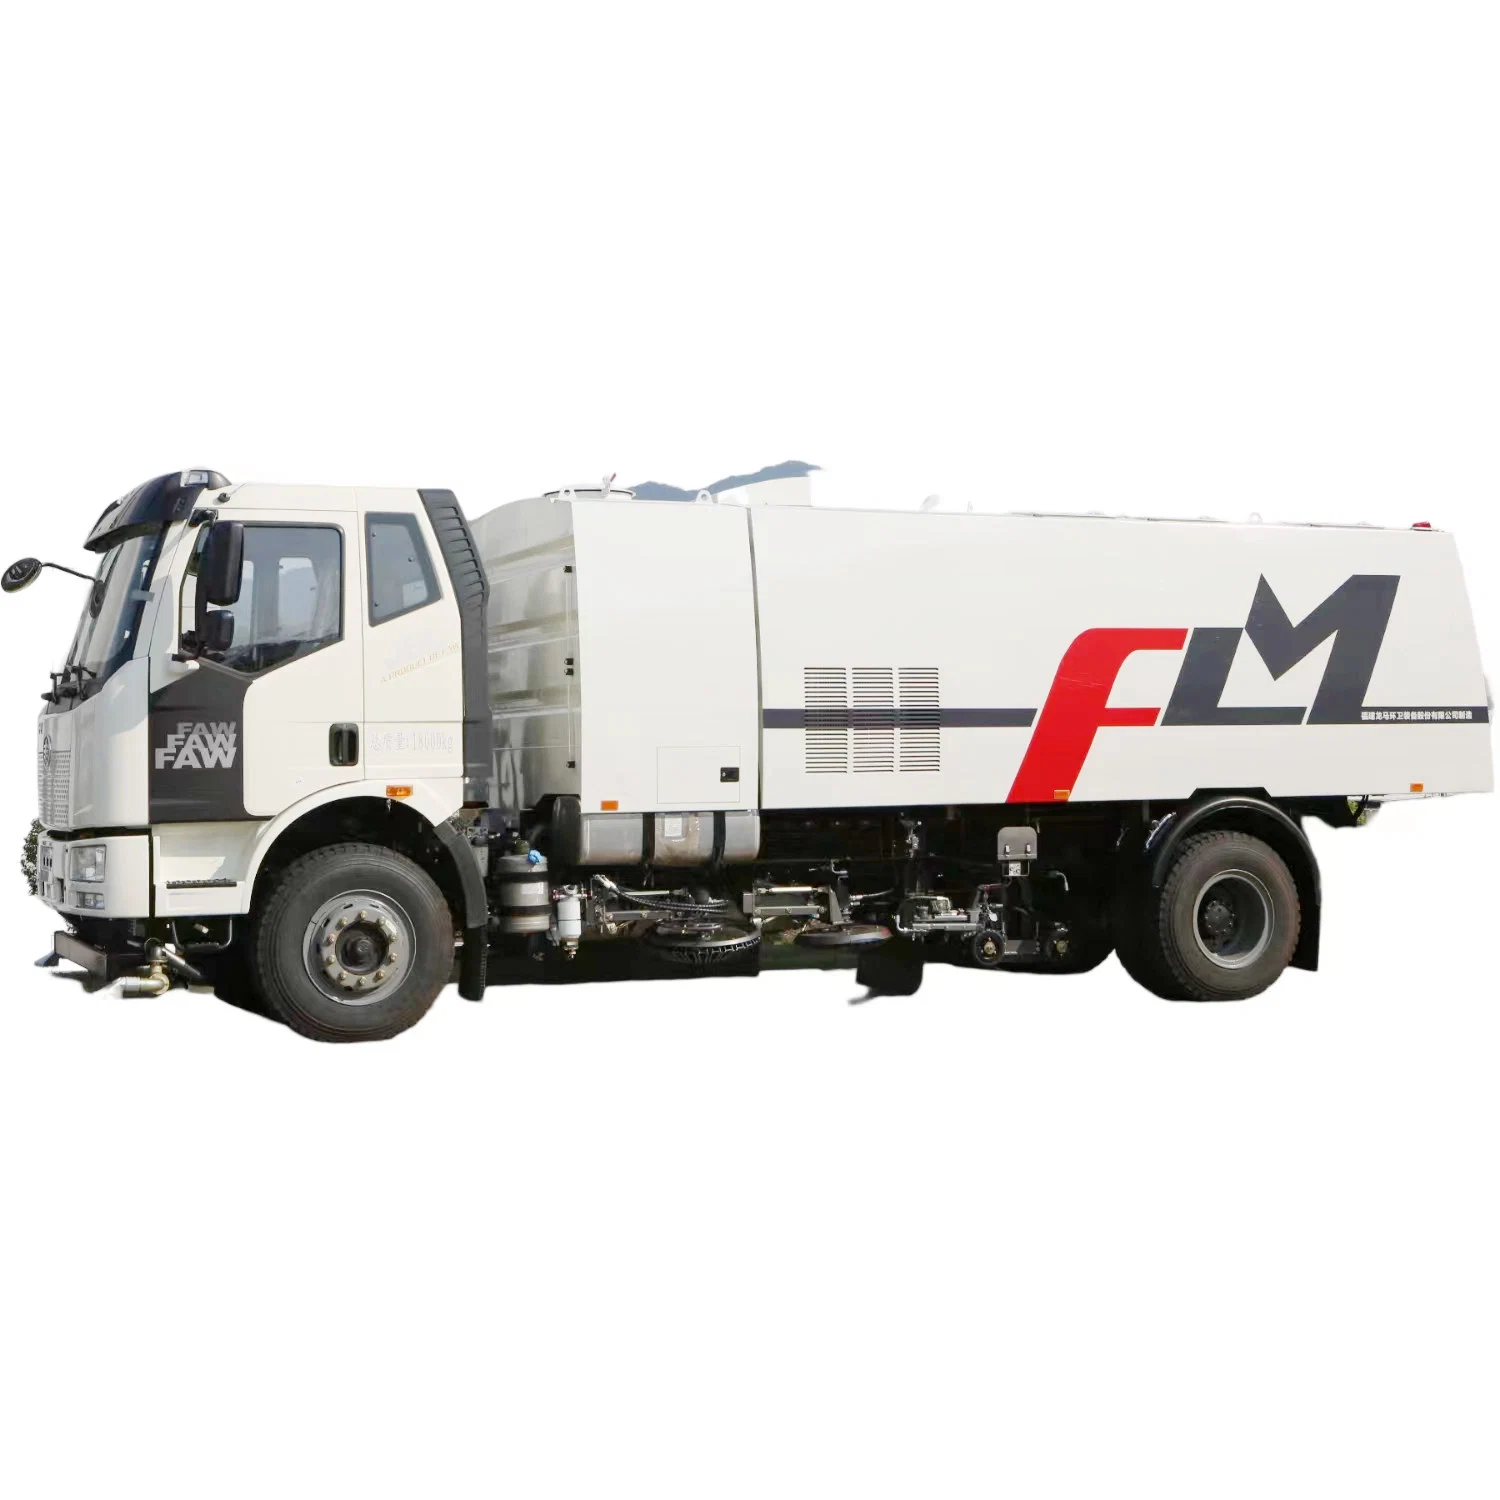 FAW Pure Sweep-Type by Sea/by Land Whole China Special Truck